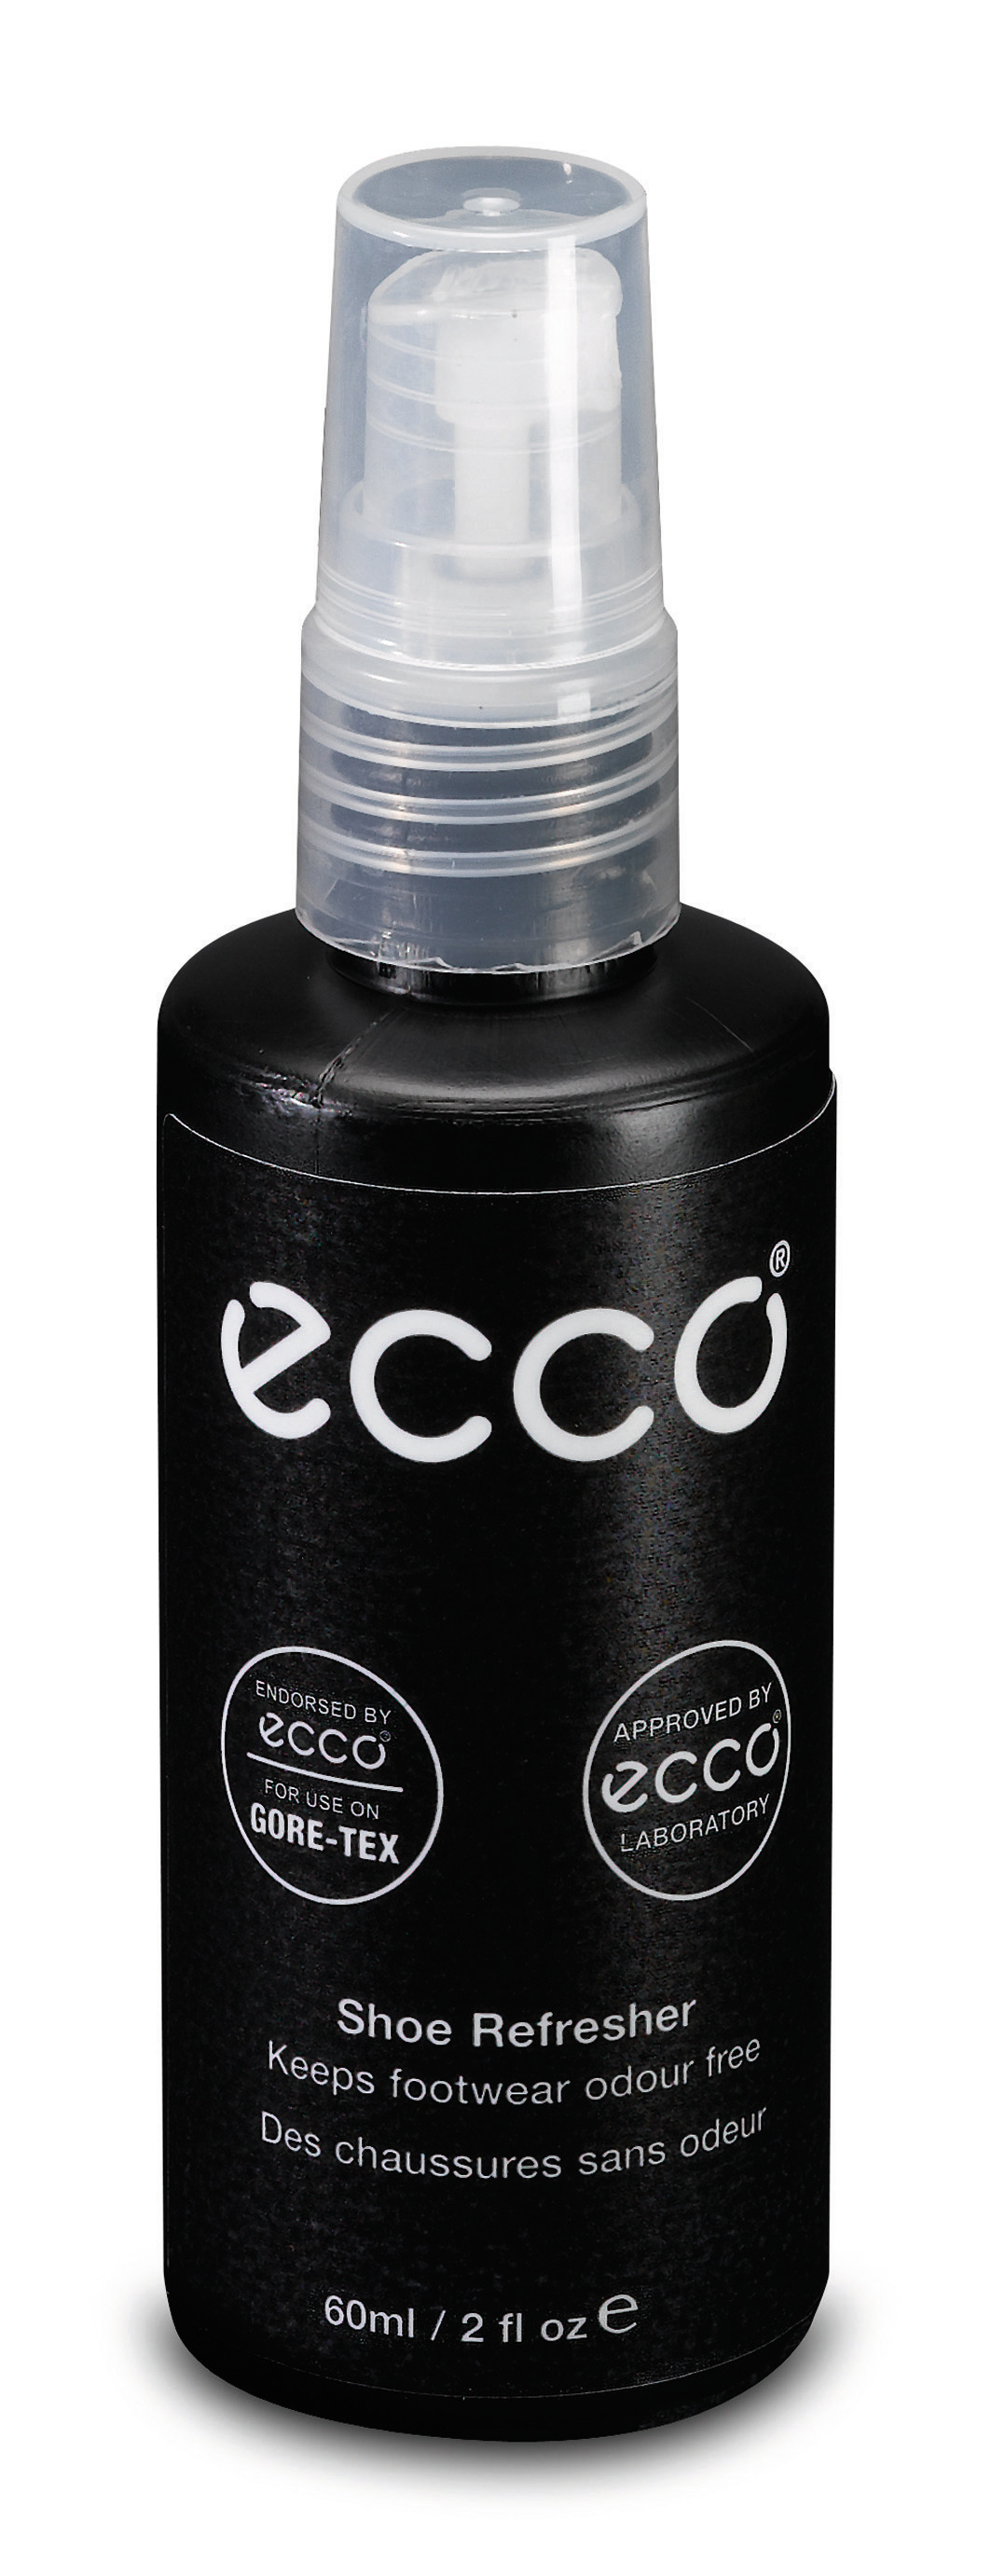 PRODUCTS CARE ECCO SHOE REFRESHER SPRAY